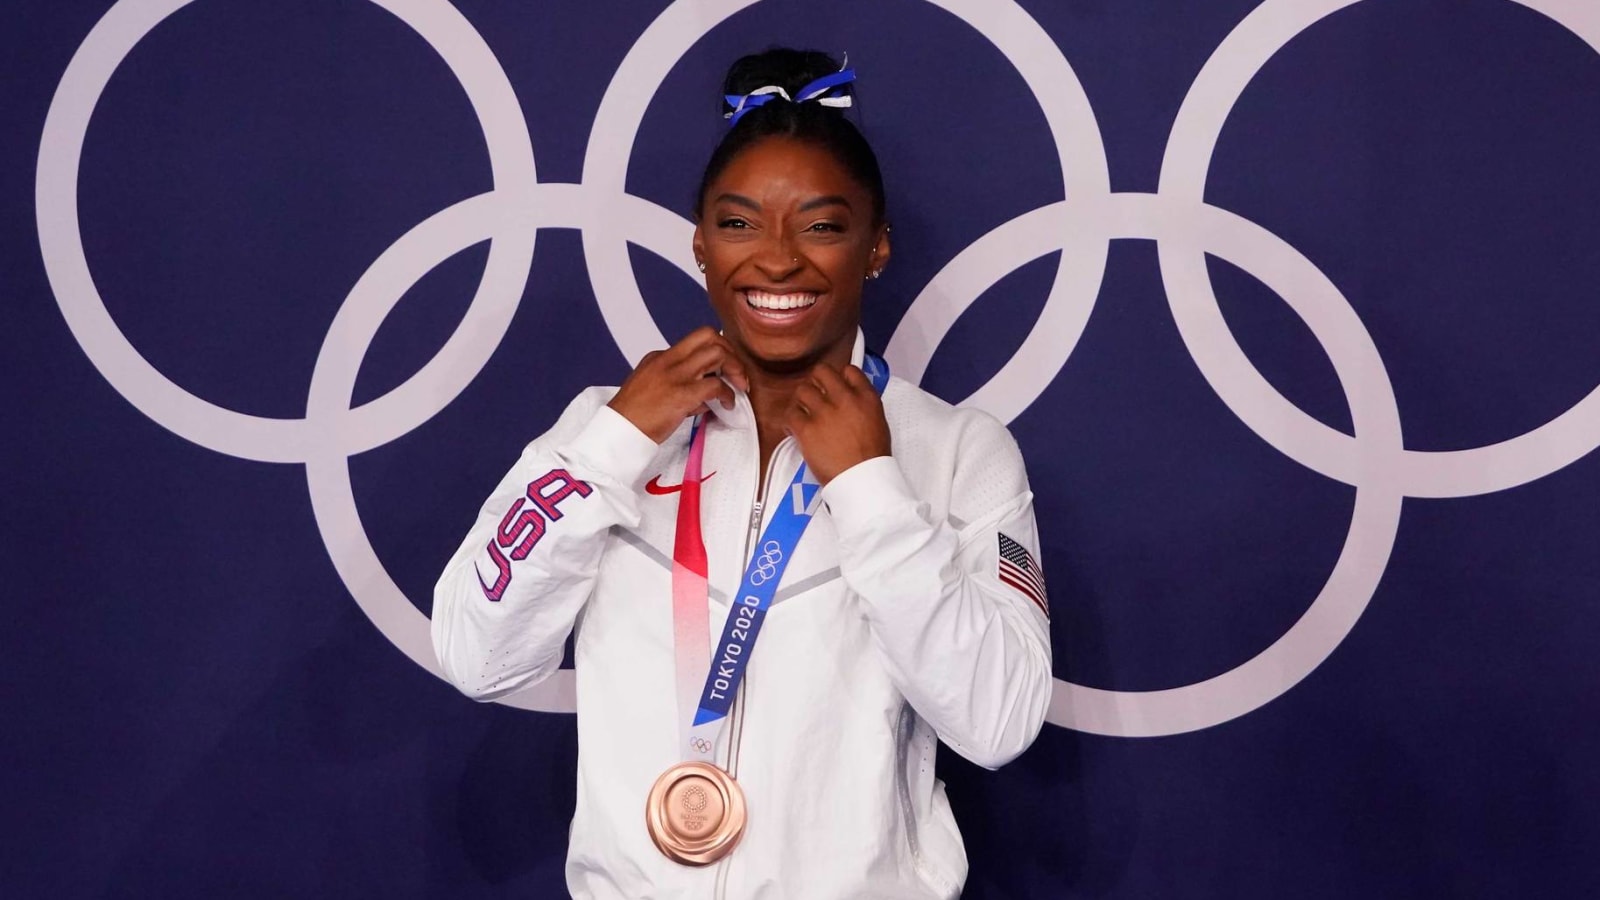 Biles among Black icons to guest in final 'black-ish' season